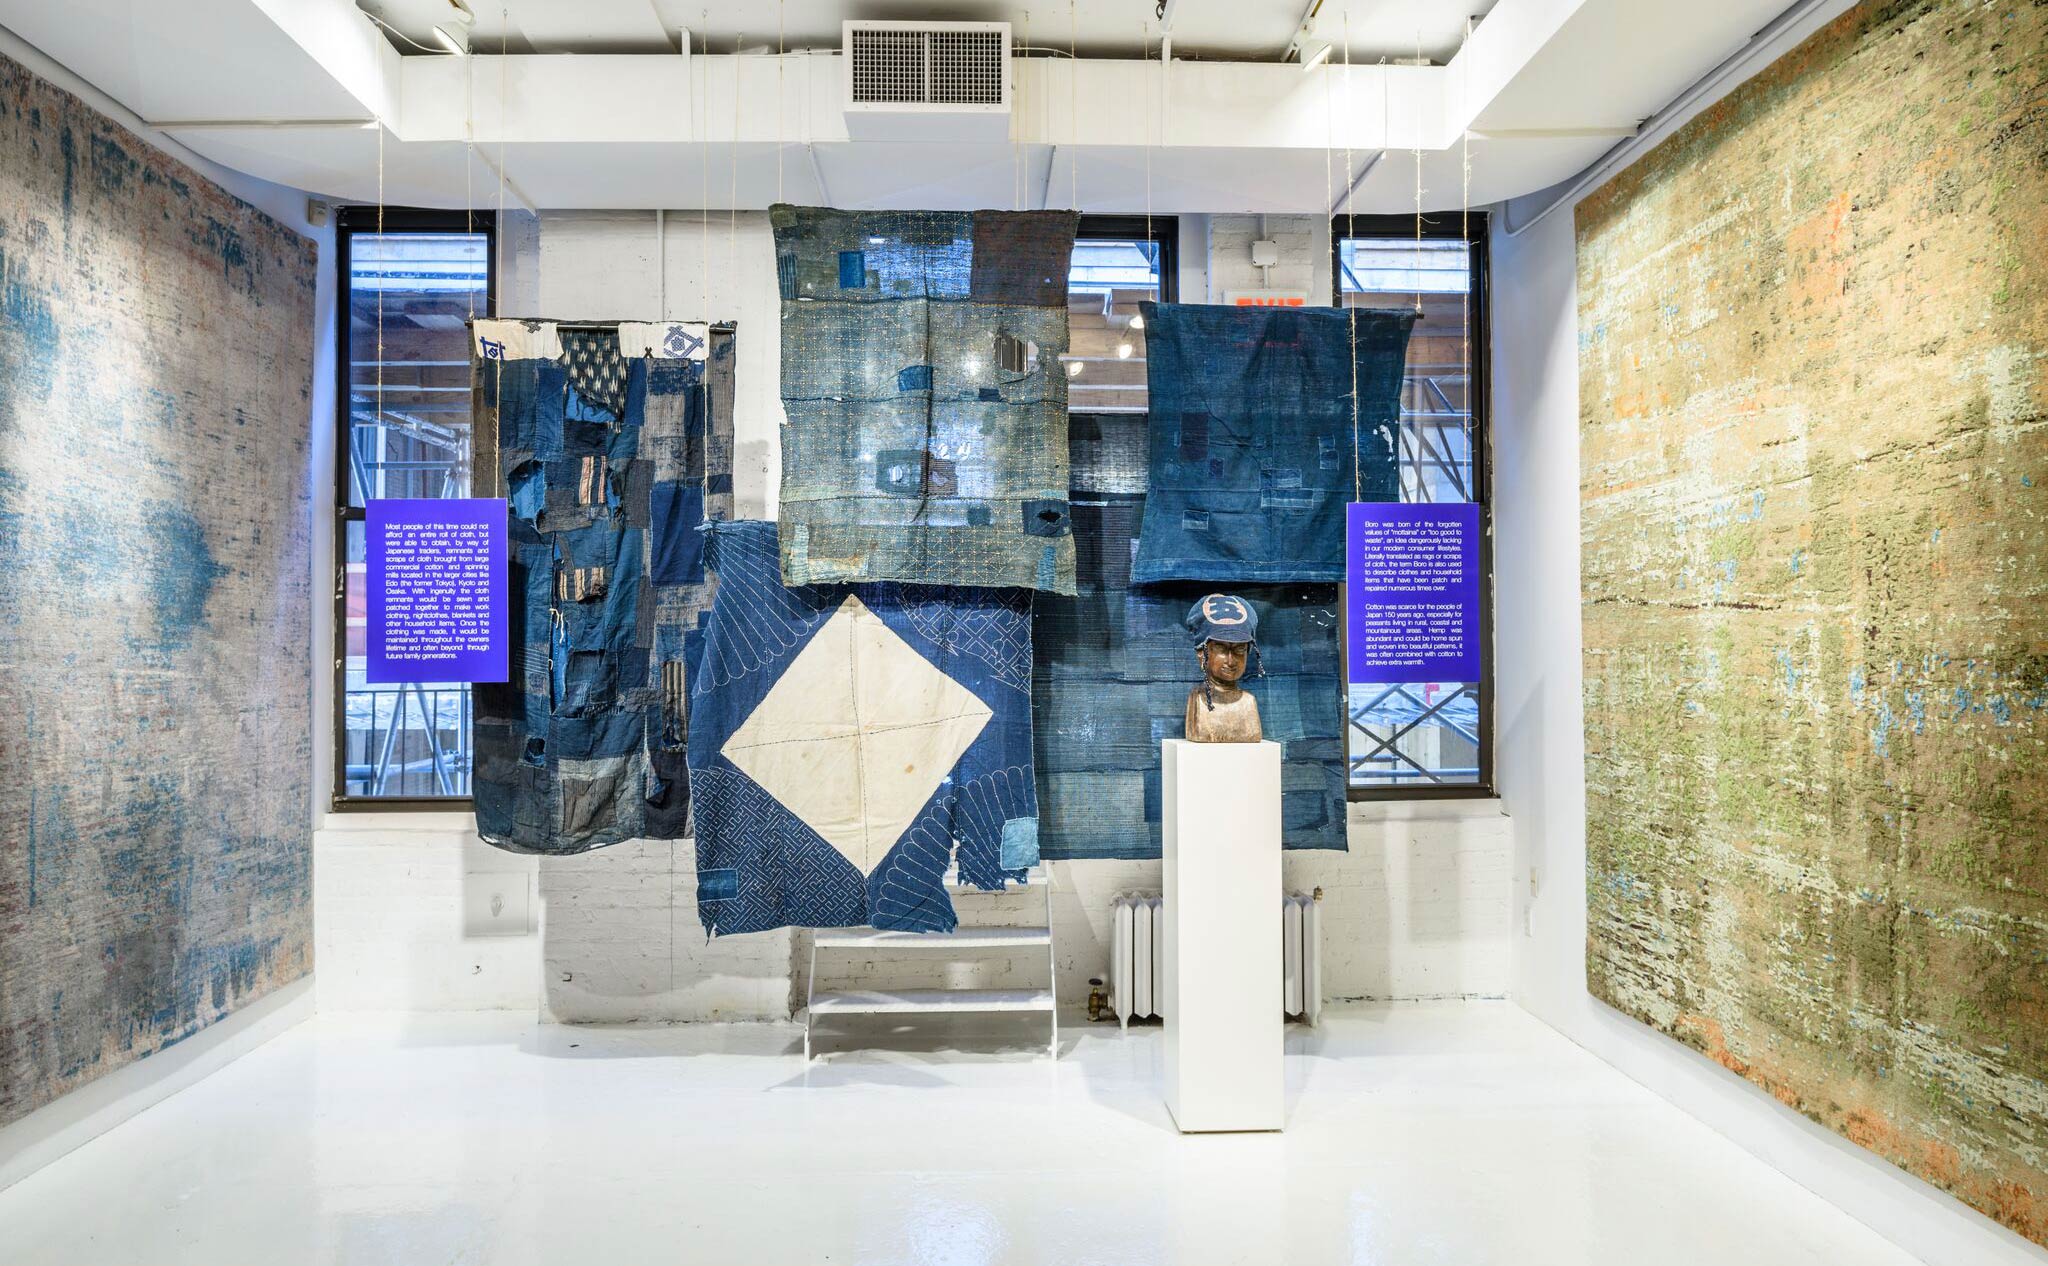 Traditional Boro textile garments (on loan to Jan Kath from a private collection) displayed in juxtaposition to the firm's contemporary carpet collection by the same name. | Image courtesy of Jan Kath.